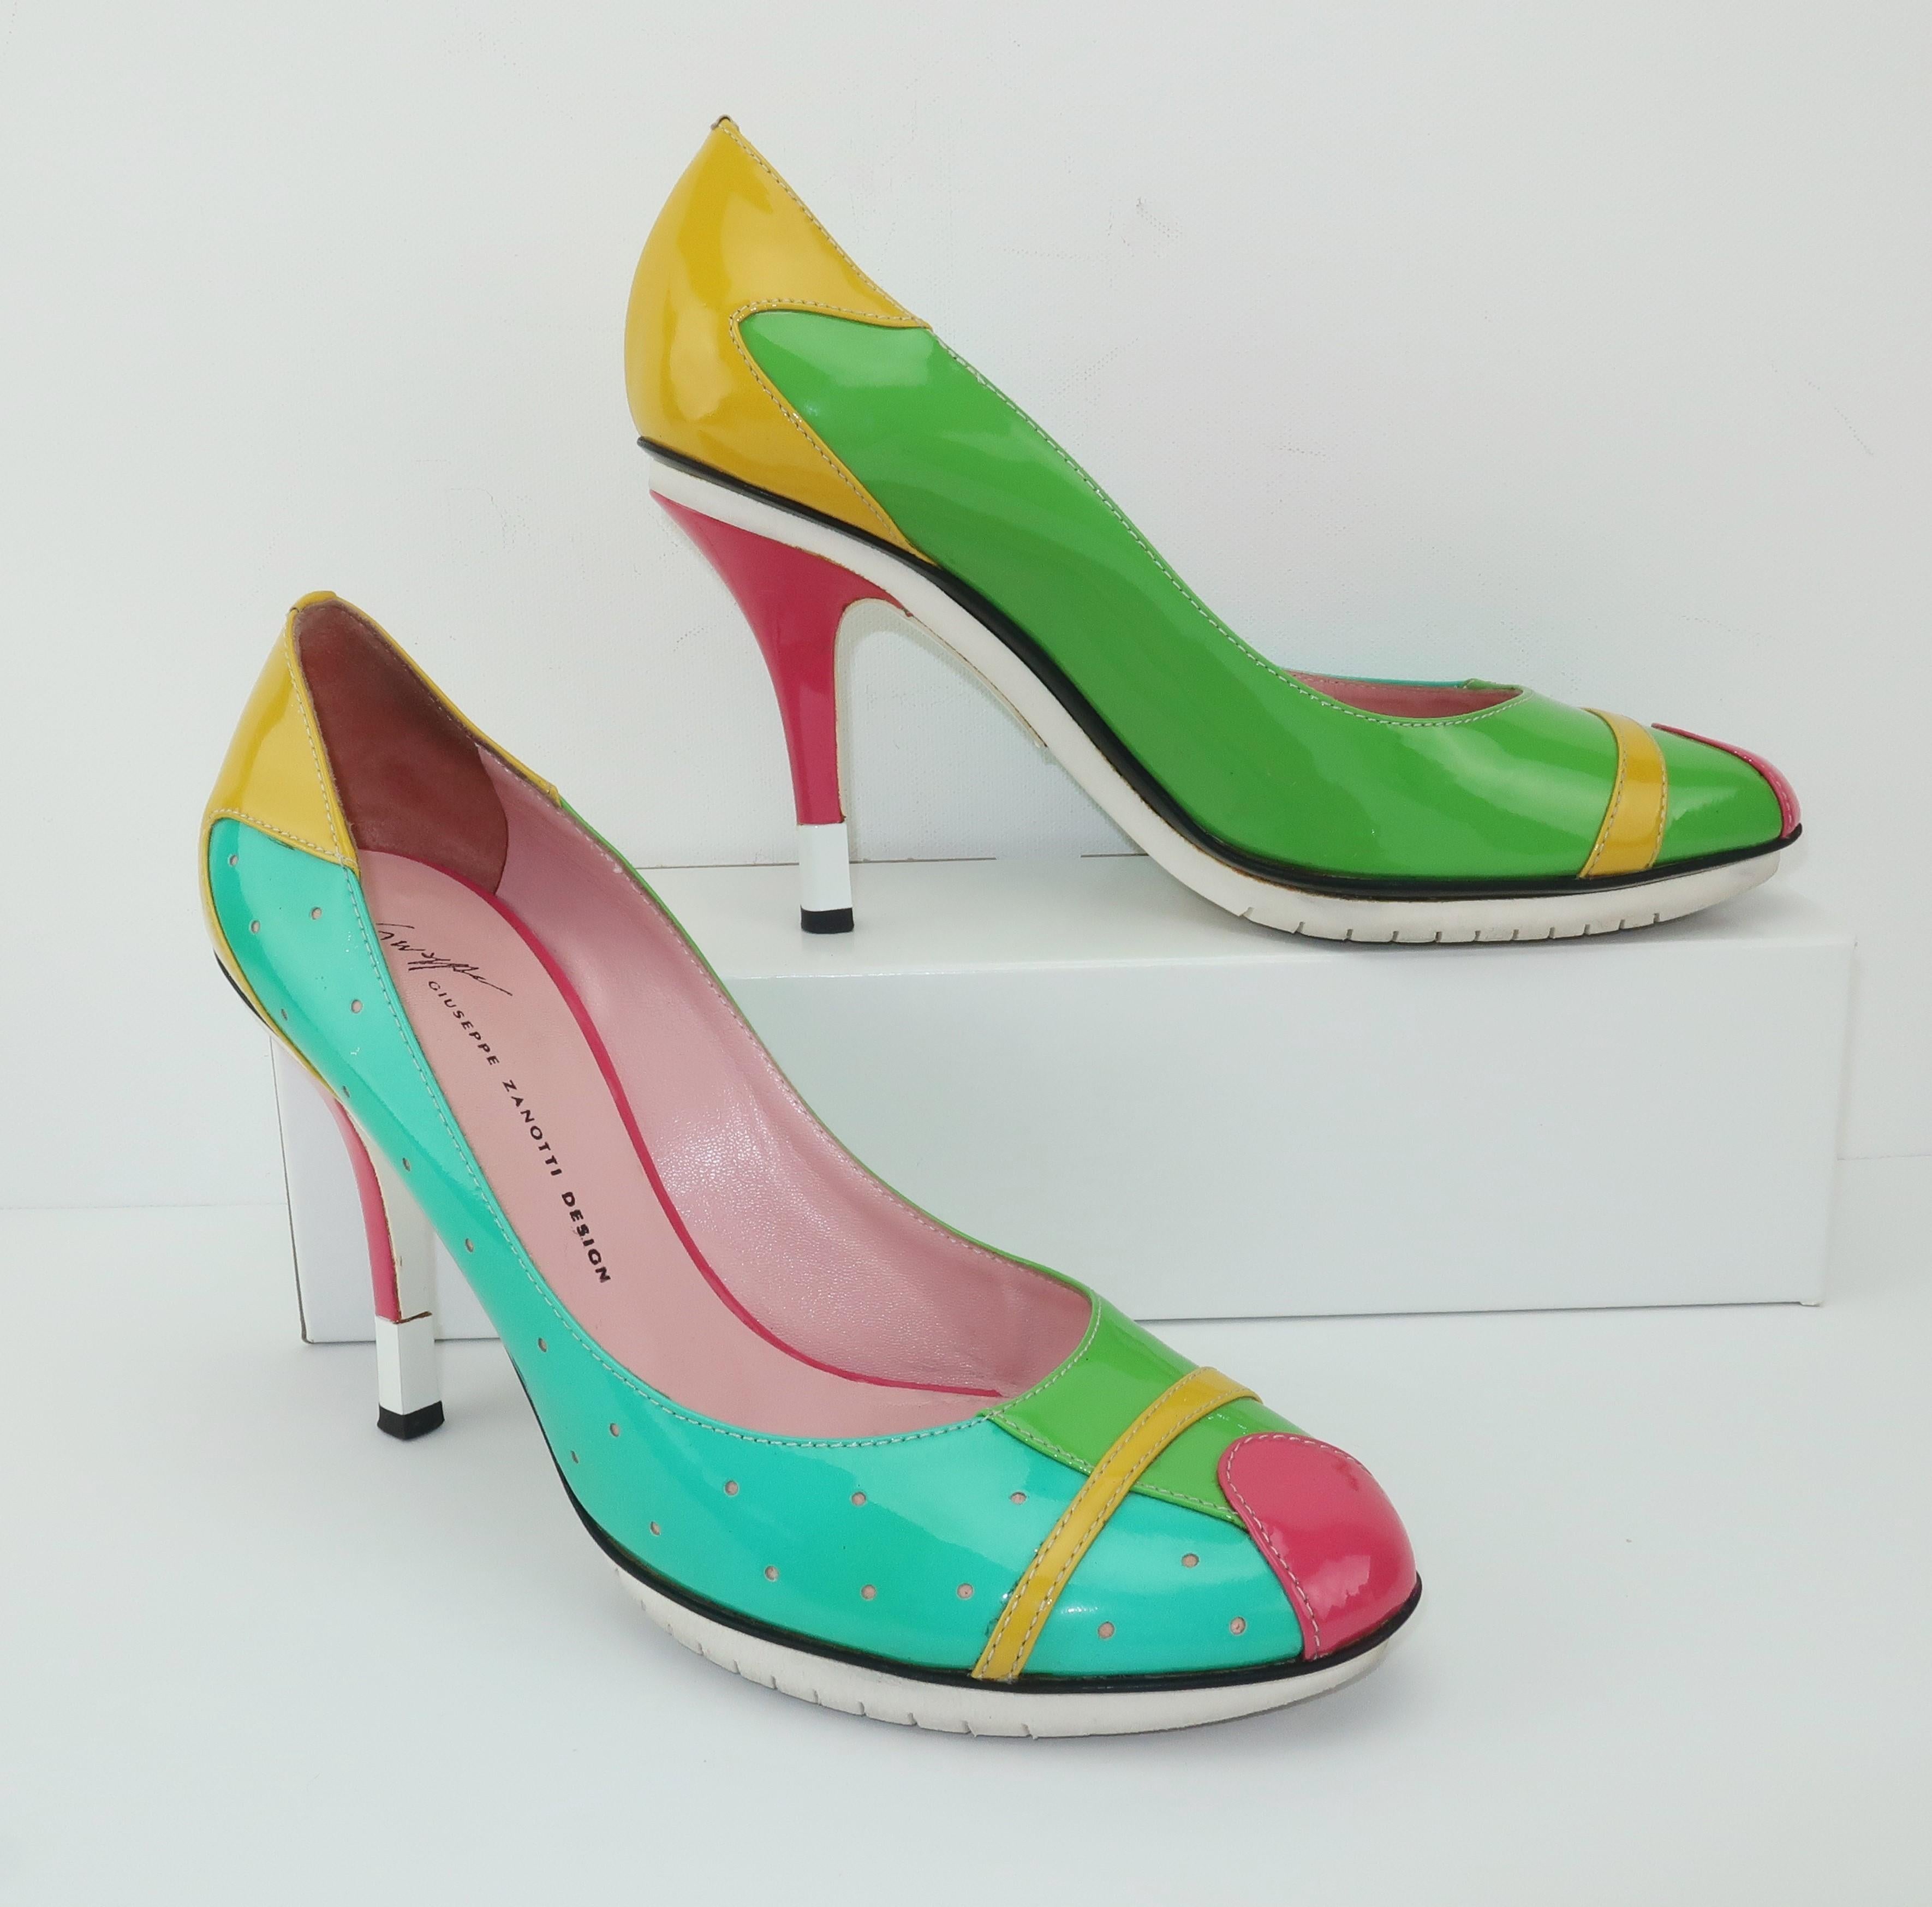 These Giuseppe Zanotti shoes are a colorful patchwork of bright patent leather with the silhouette of ladylike pumps and the details of sneakers.  The color block design includes shades of hot pink, green, turquoise and yellow with black piping and